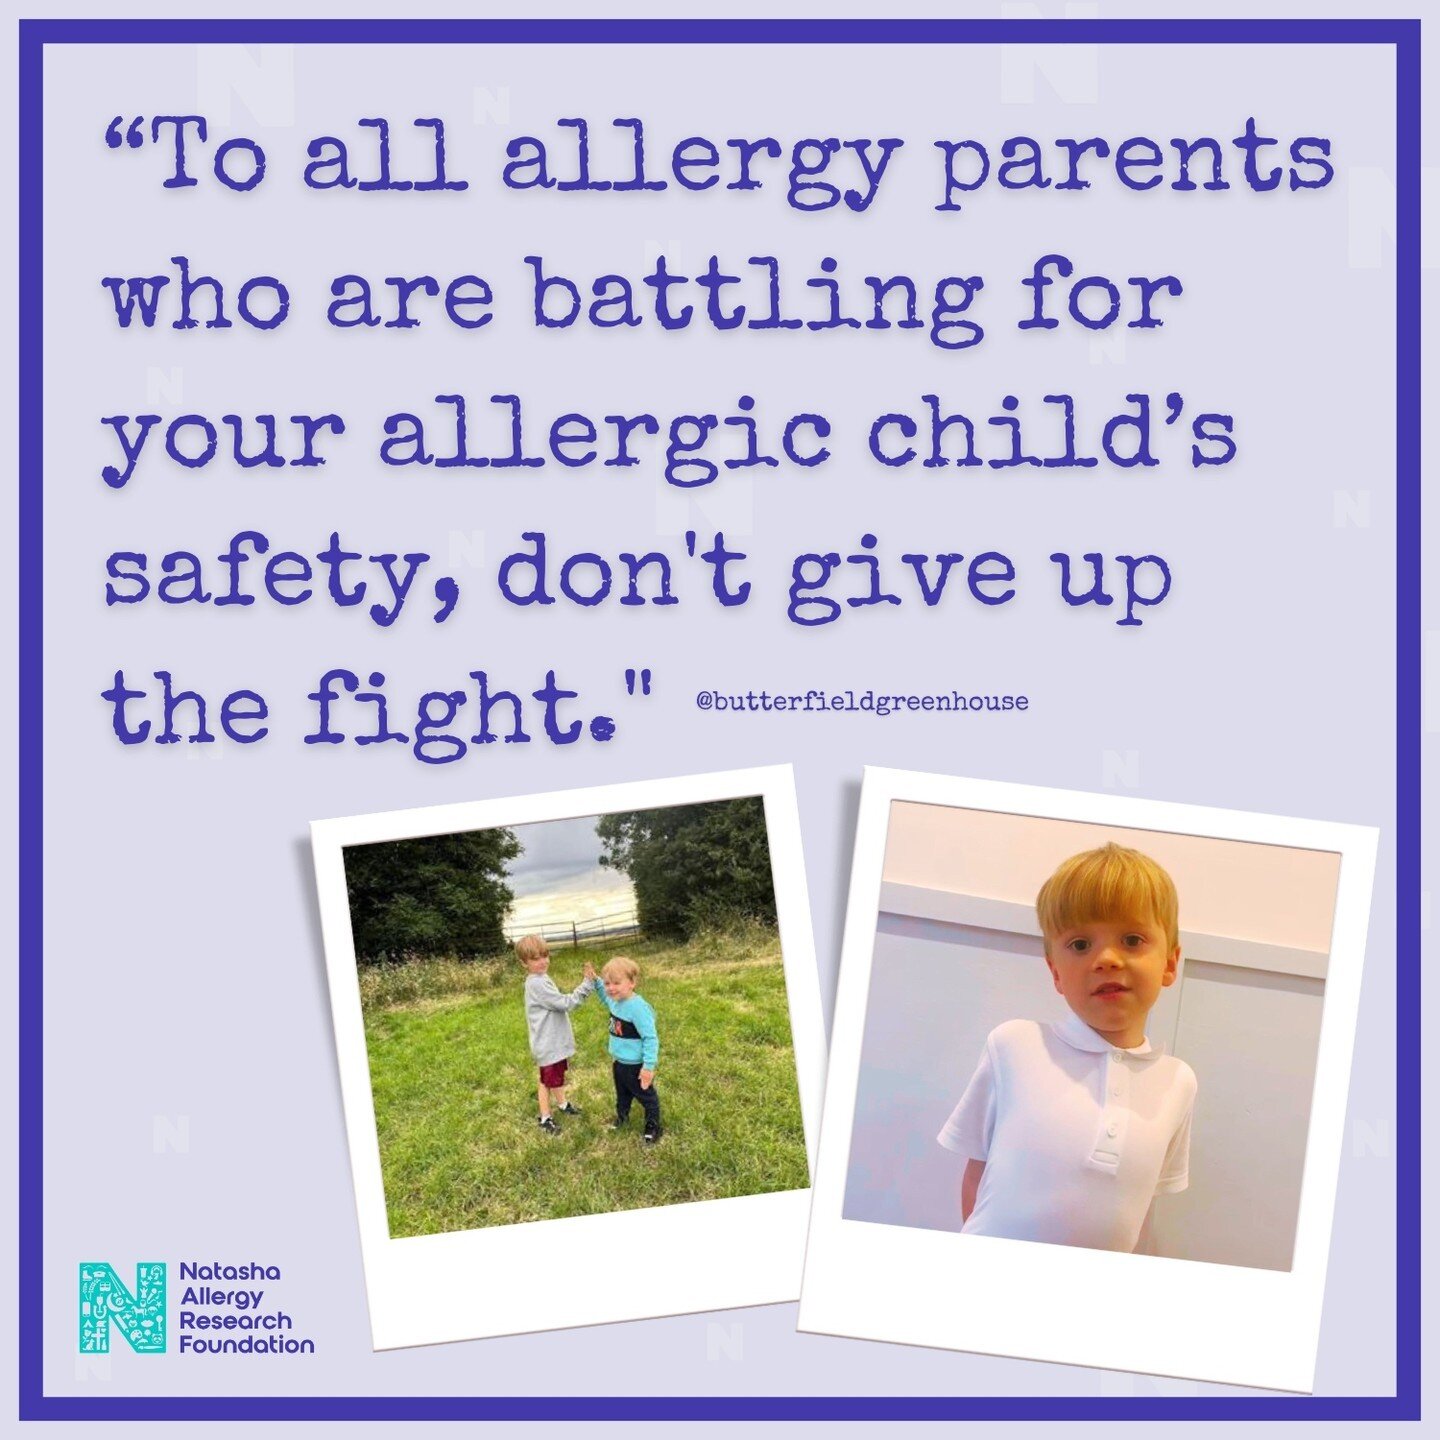 Allergy mum Billie, @butterfieldgreenhouse shared her family's incredible victory after a 2 year battle to get the correct care for her little boy Jess at his school for his food allergies.

High 5 to us 👋
#theallergyparentswin

&ldquo;It&rsquo;s be